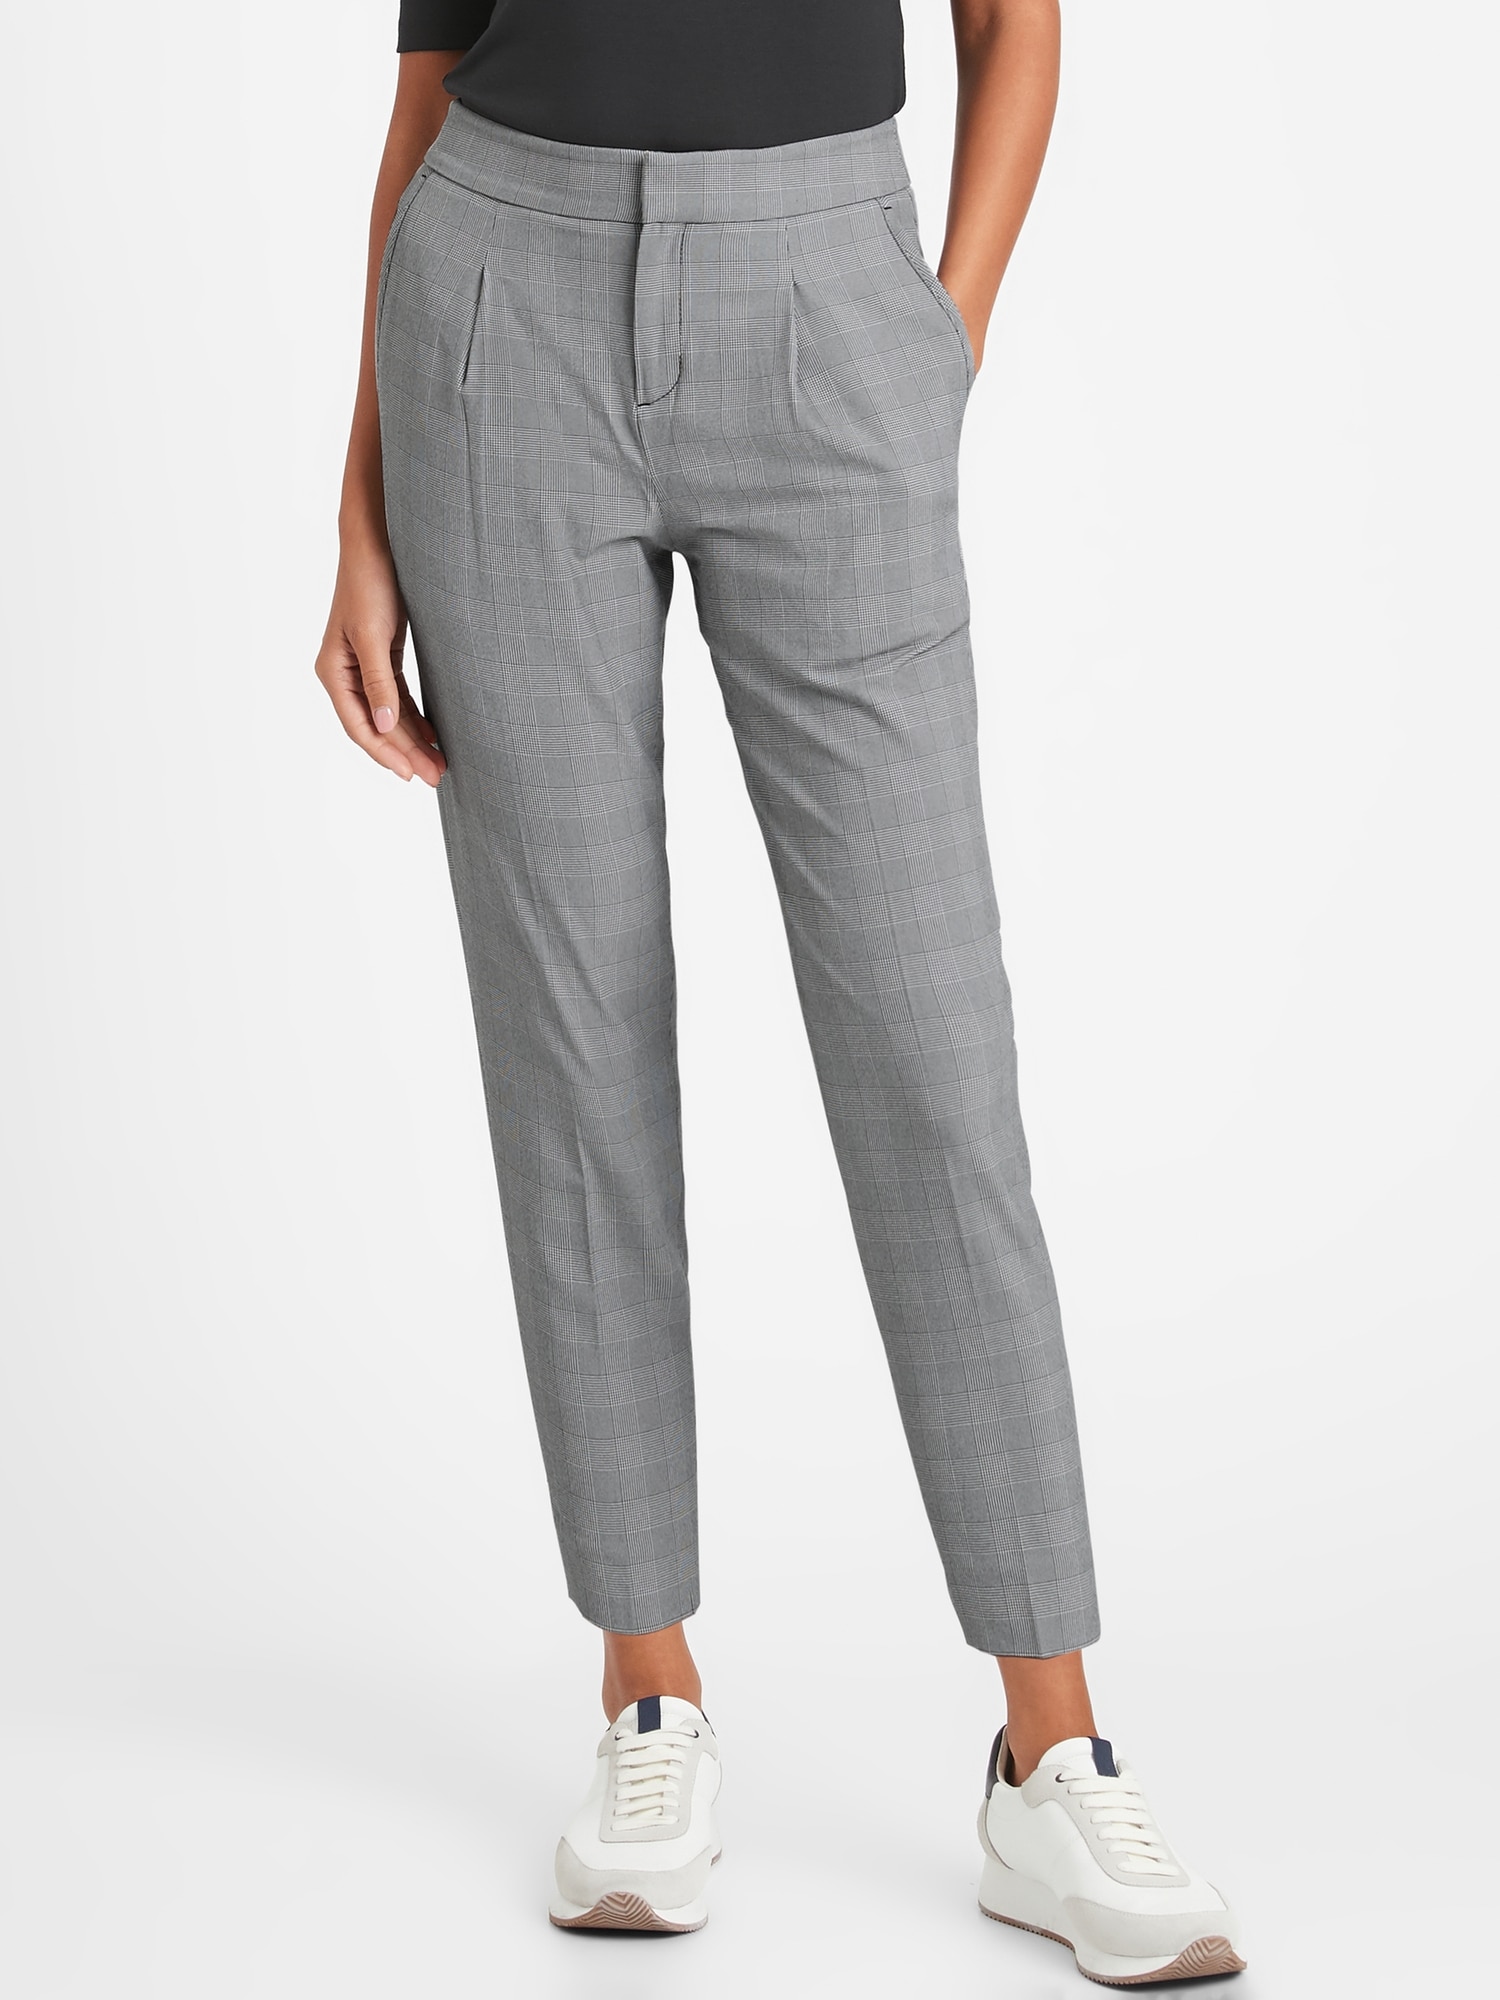 High-Rise Tapered Performance Stretch Pant | Banana Republic